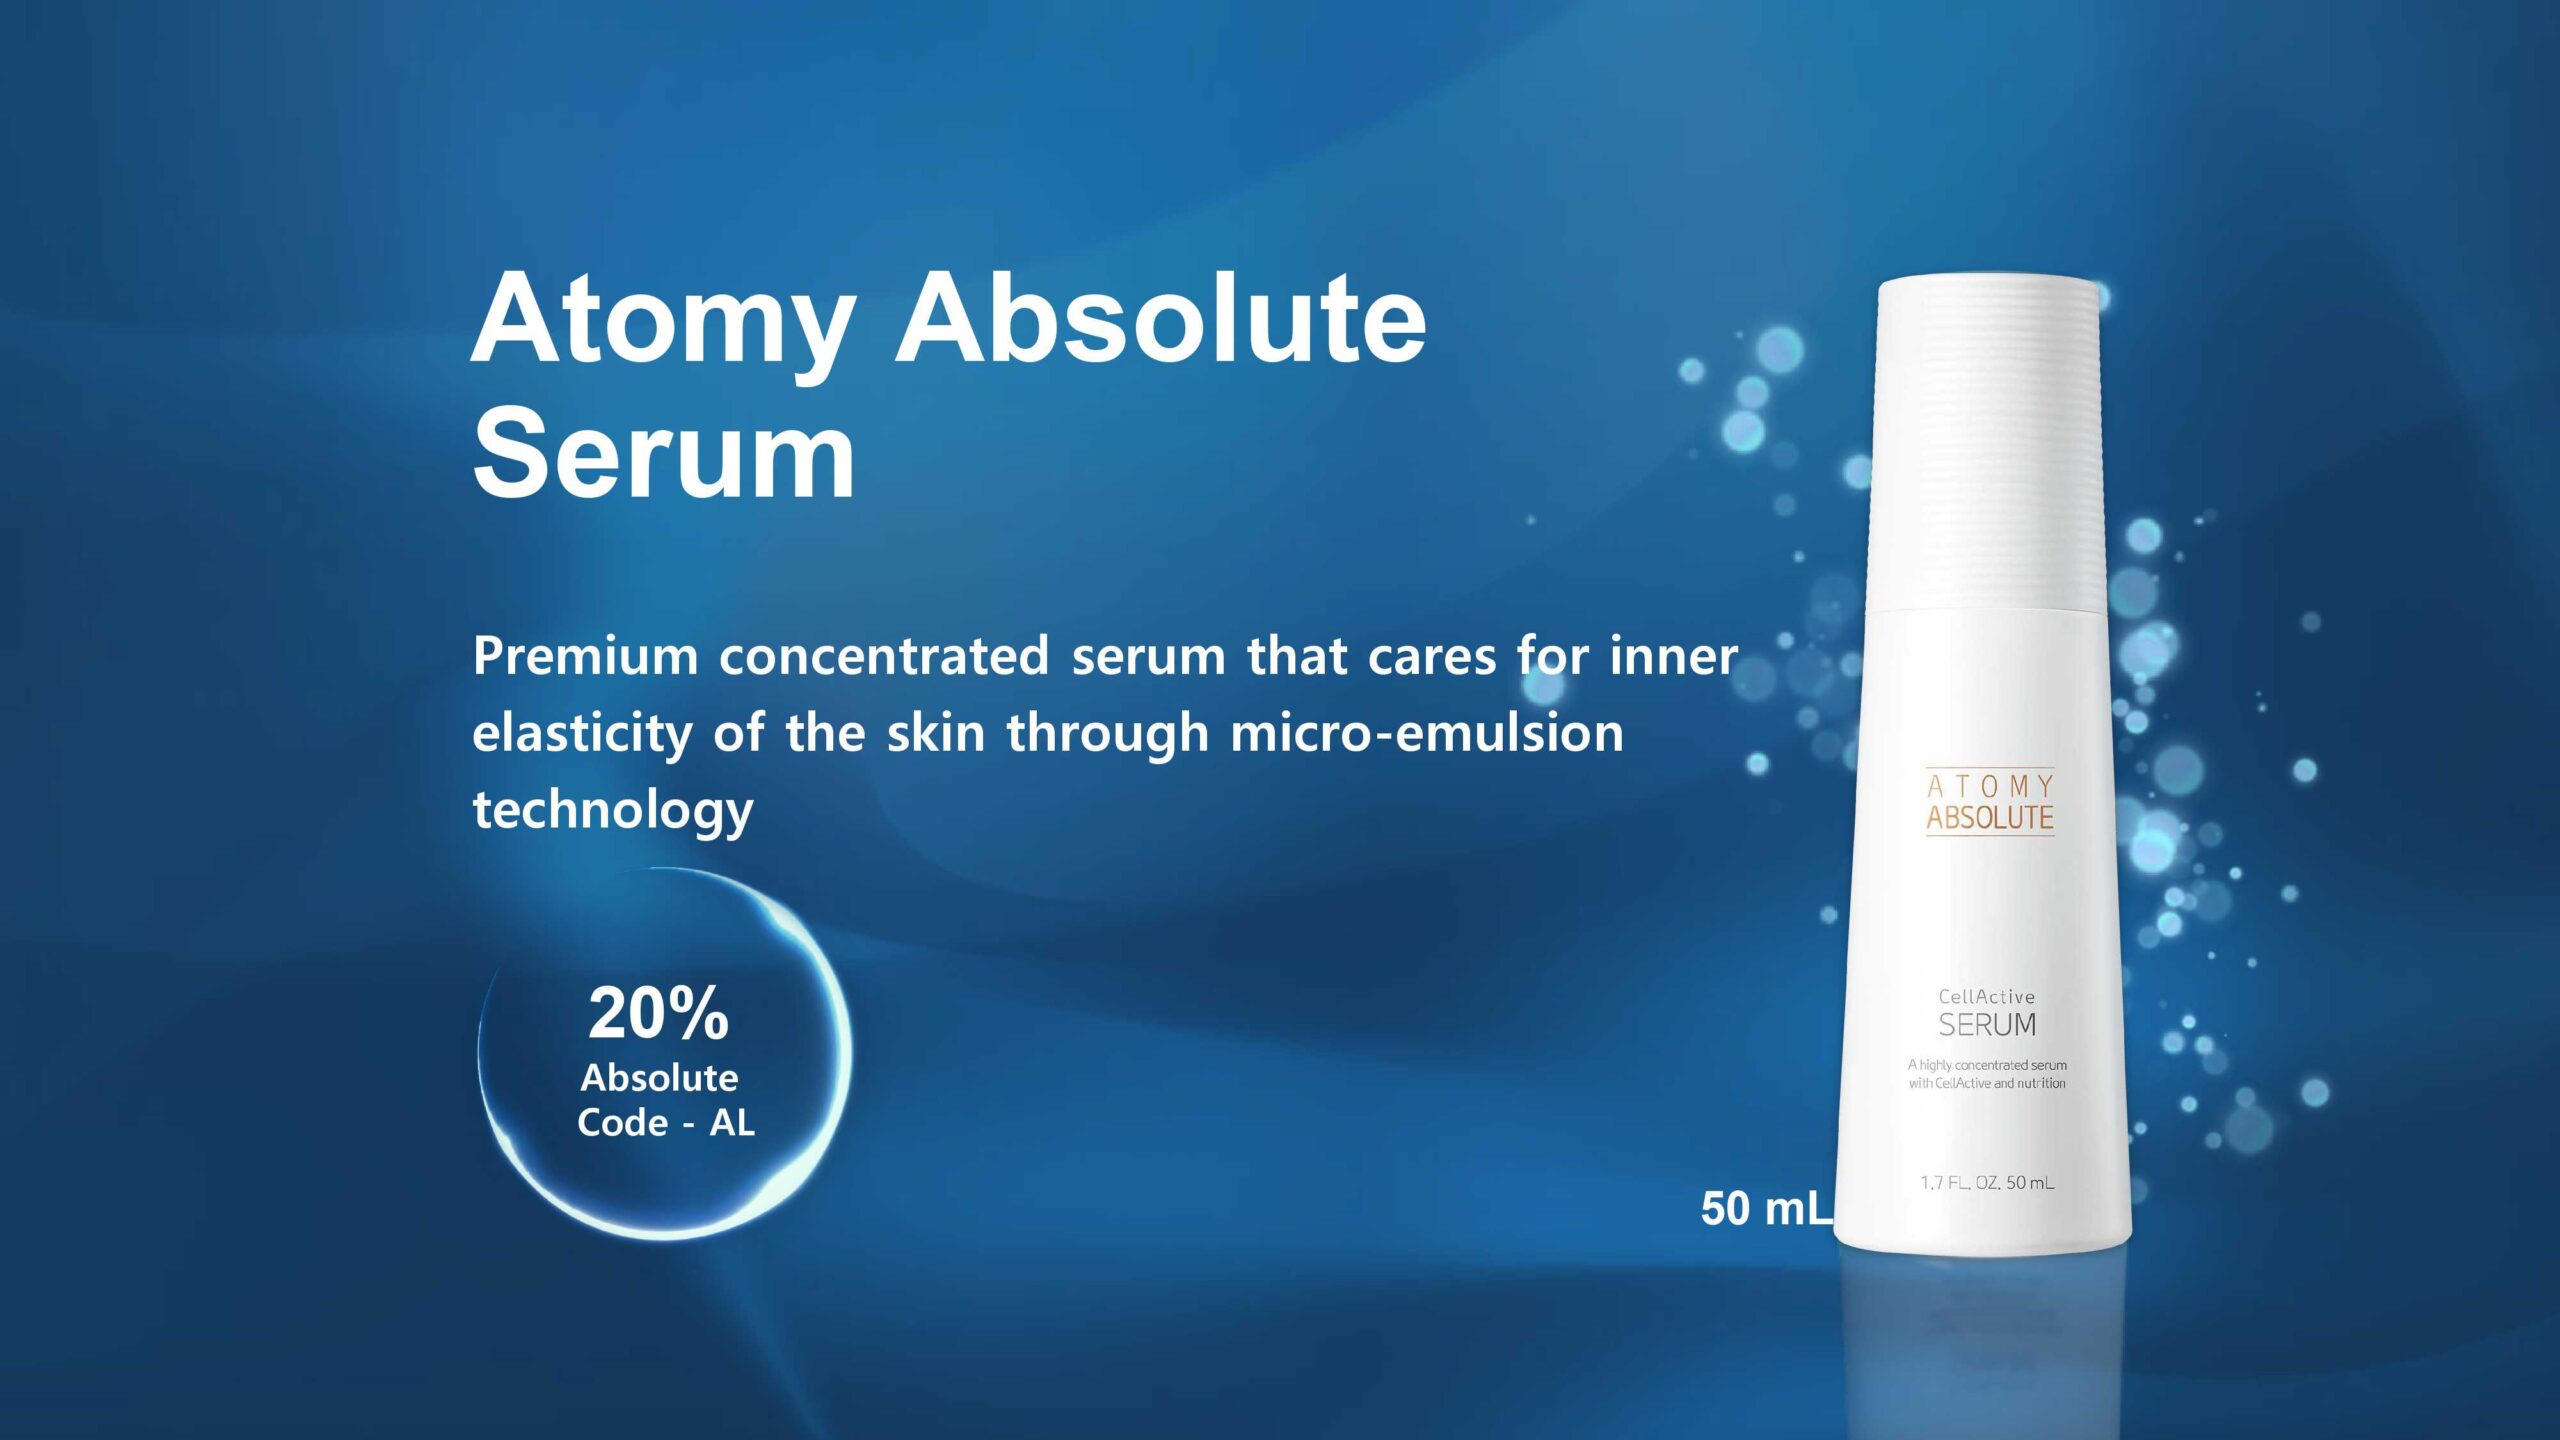 ATOMY Absolute Cell Active Serum